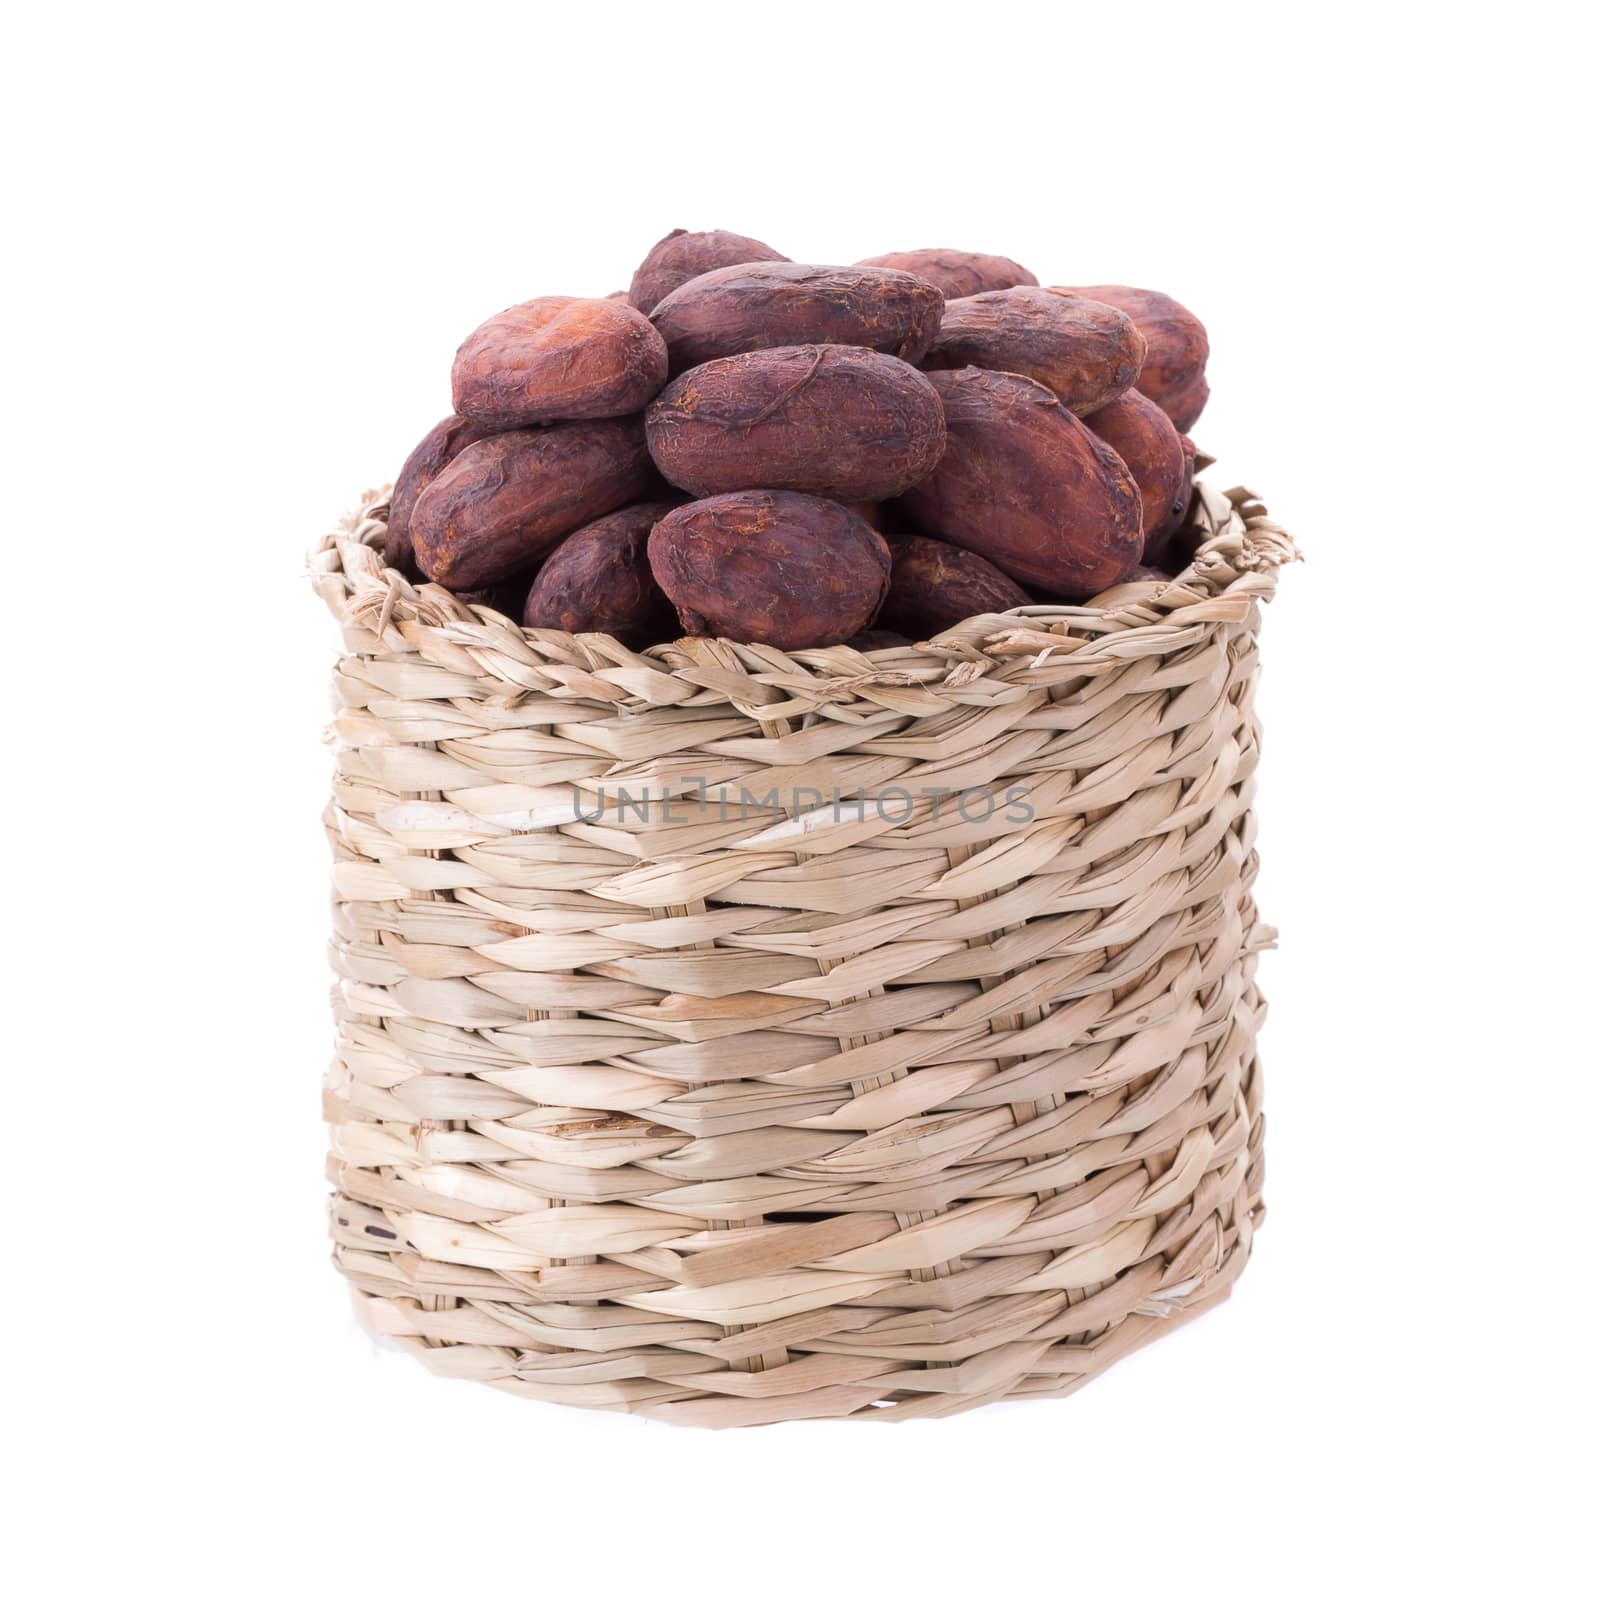 Cacao beans in basket isolated on white backgroun.